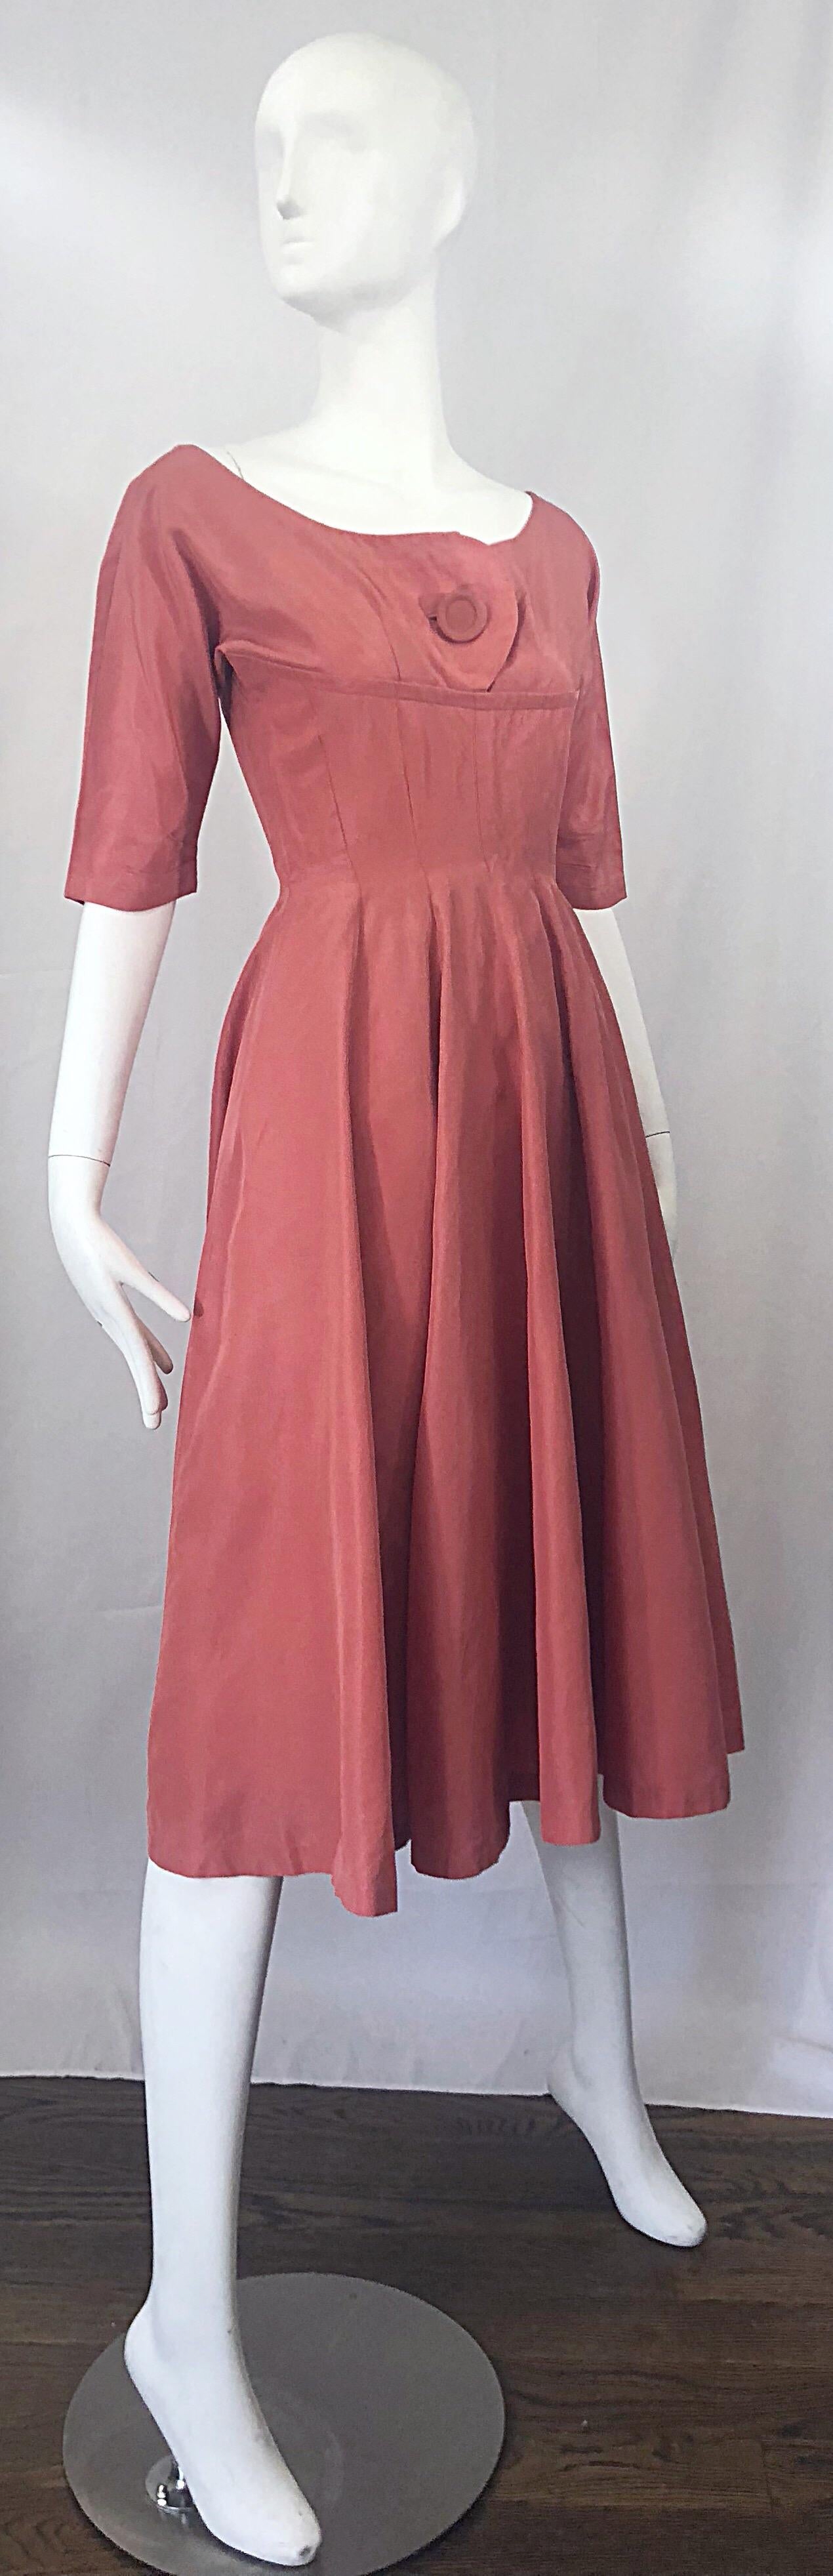 1950s Gigi Young Salmon Coral Pink Silk Taffeta Vintage 50s Fit n Flare Dress For Sale 4